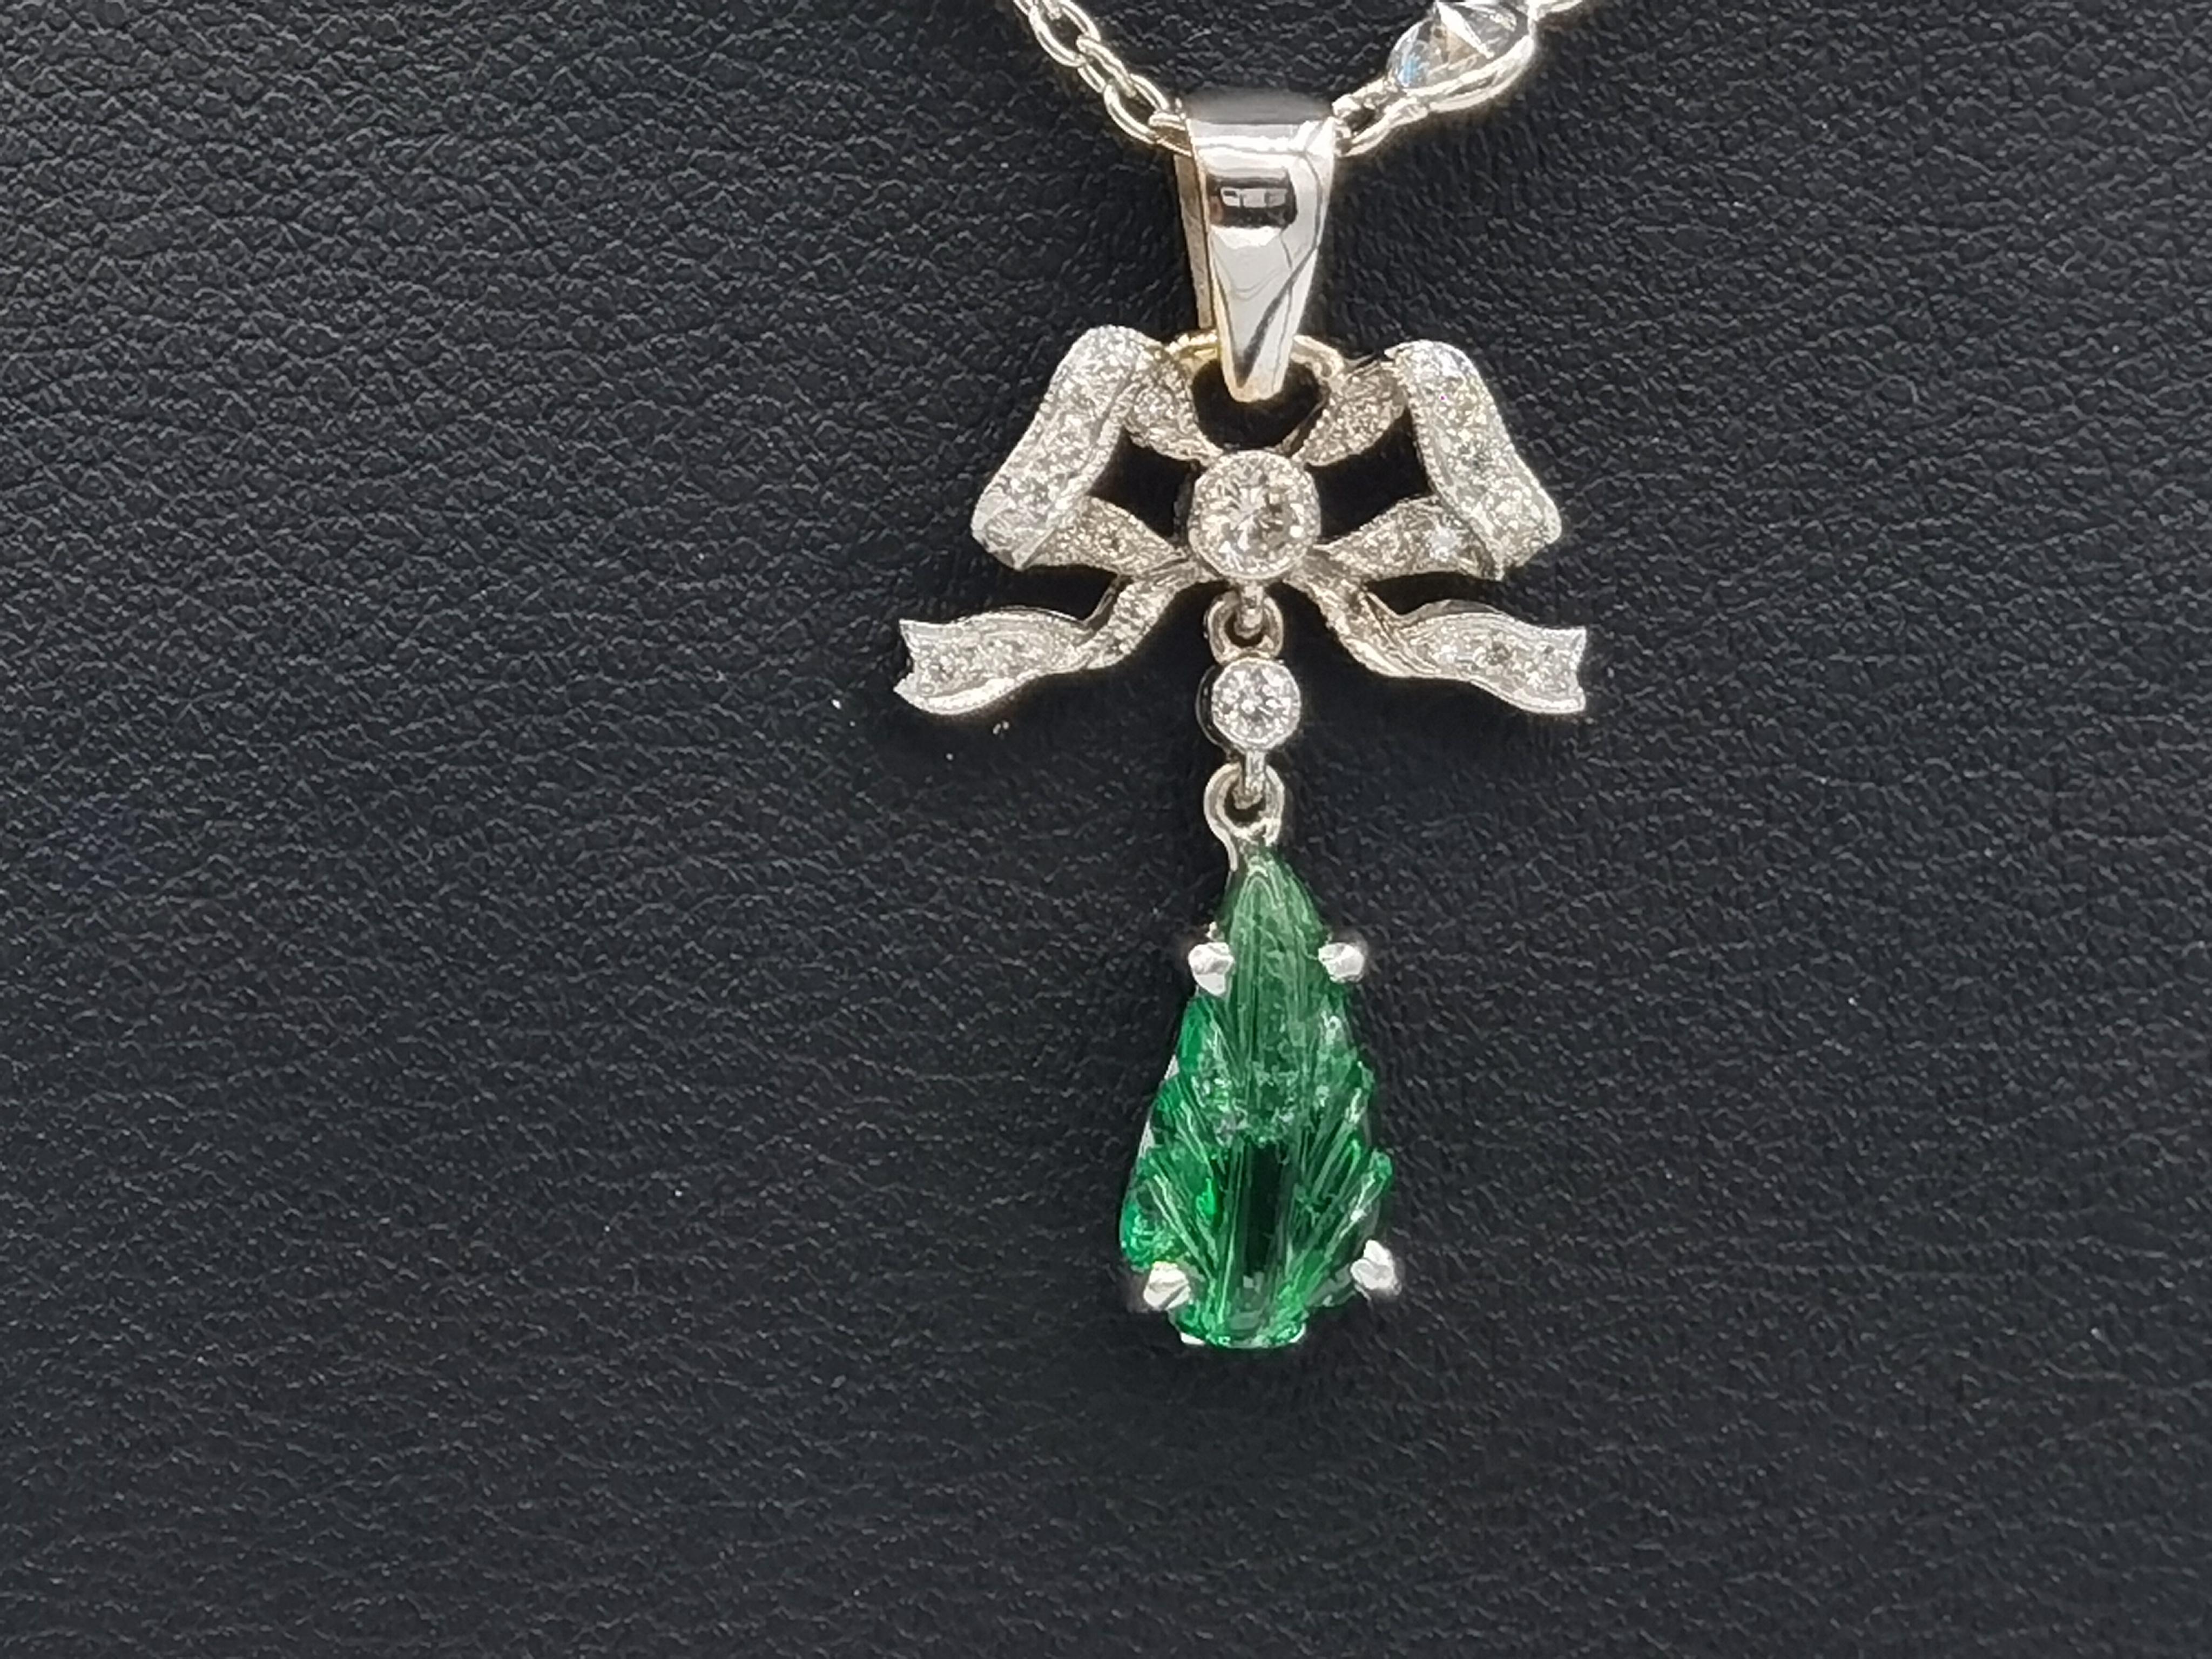 18 k white gold
cut emerald like a sheet
ca. 0,10 ct diamond
size 3 cm x 1,5 cm
2,5 gram
the emerald is movable
it a nice pease also for young people